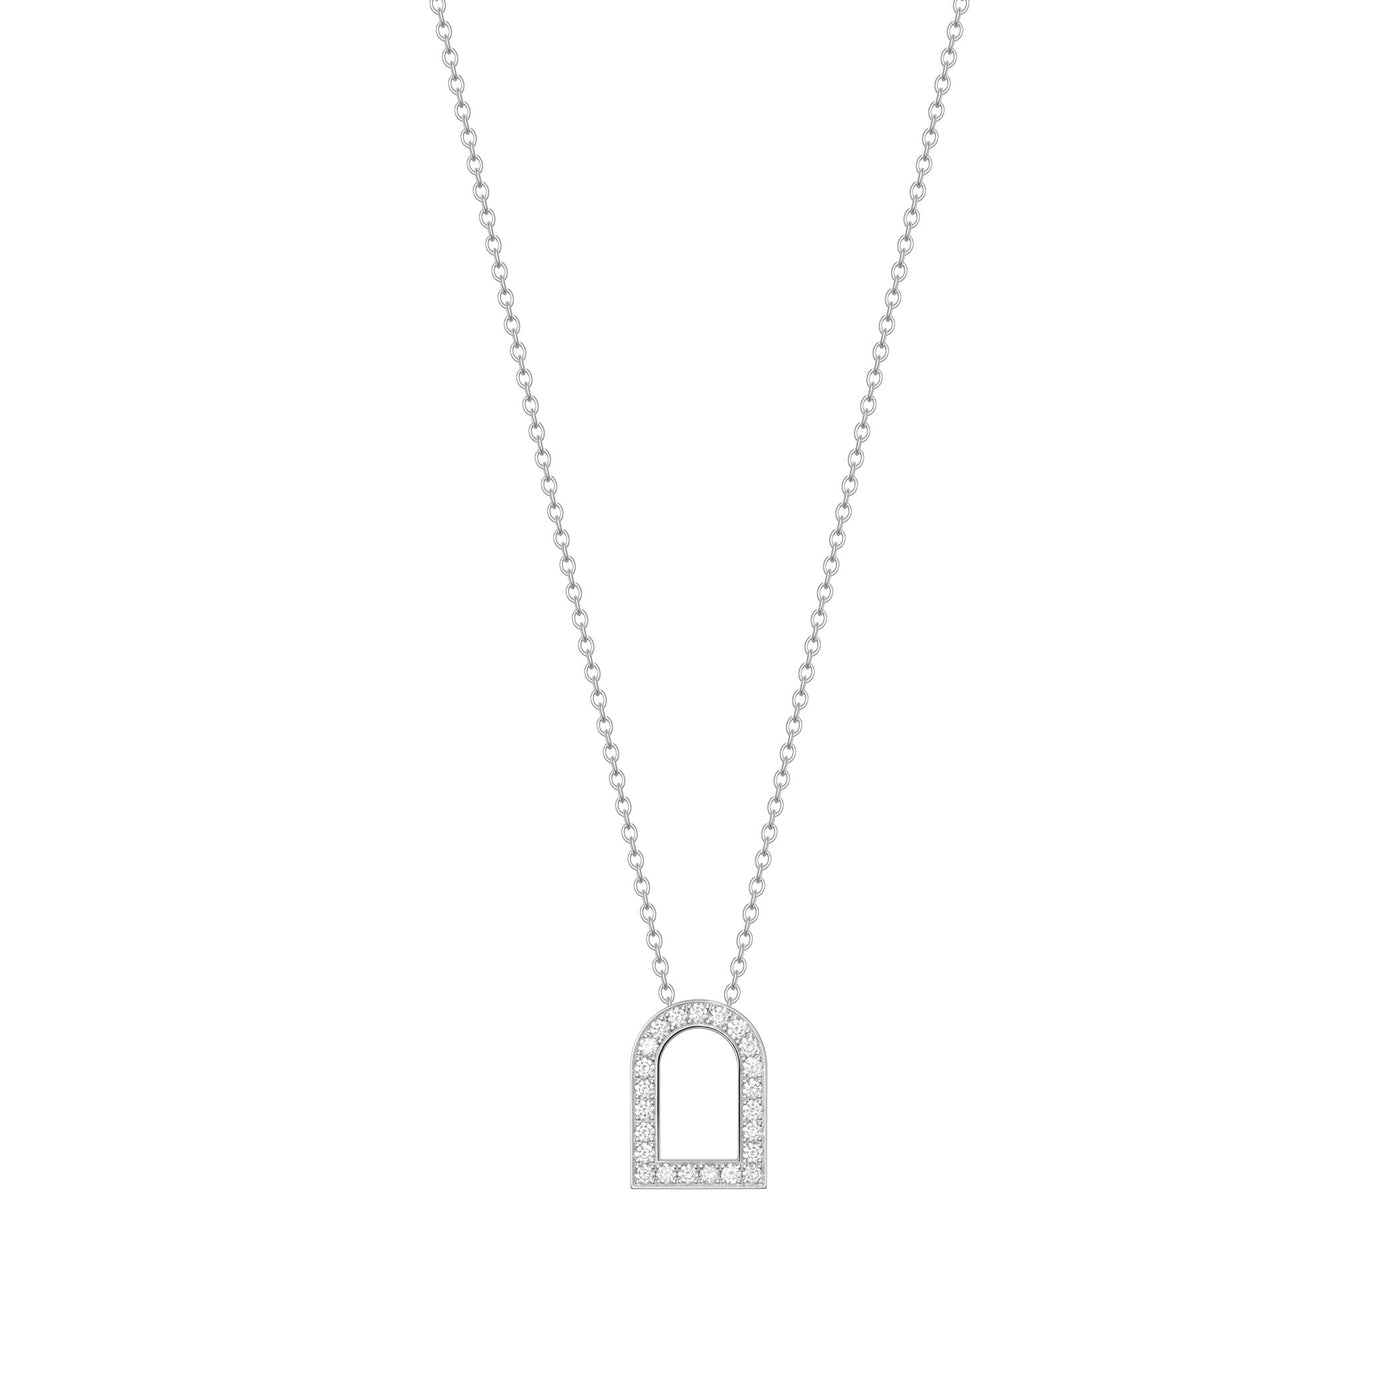 L'Arc Voyage Charm GM, 18k White Gold with Galerie Diamonds on Chain Necklace - DAVIDOR